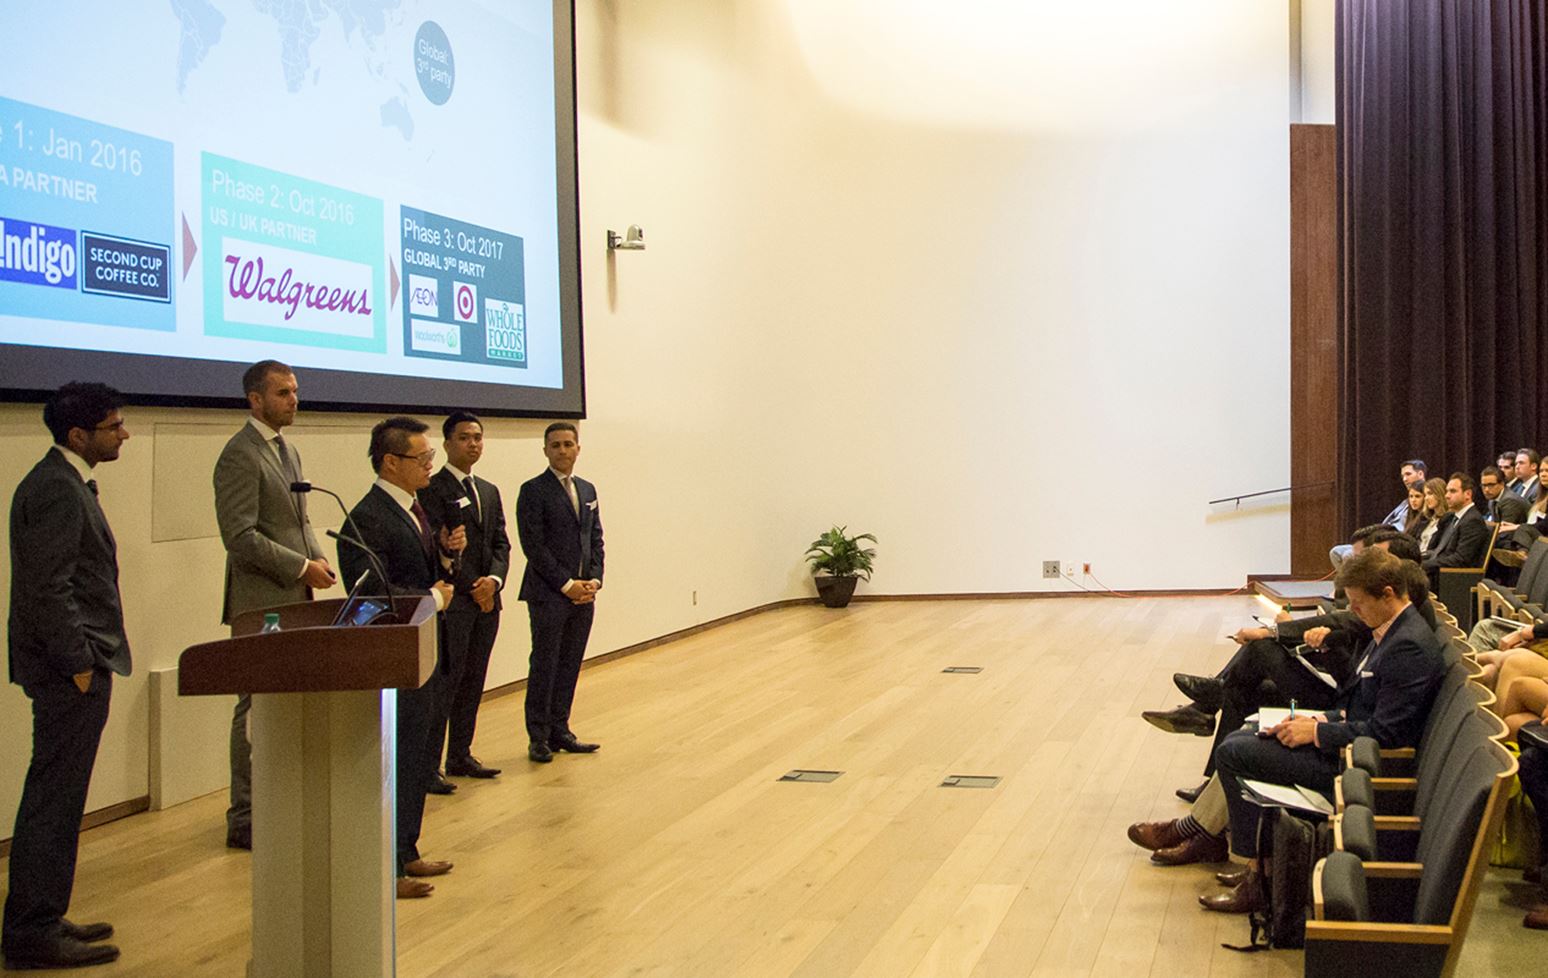 Accenture MBA case competition presentations